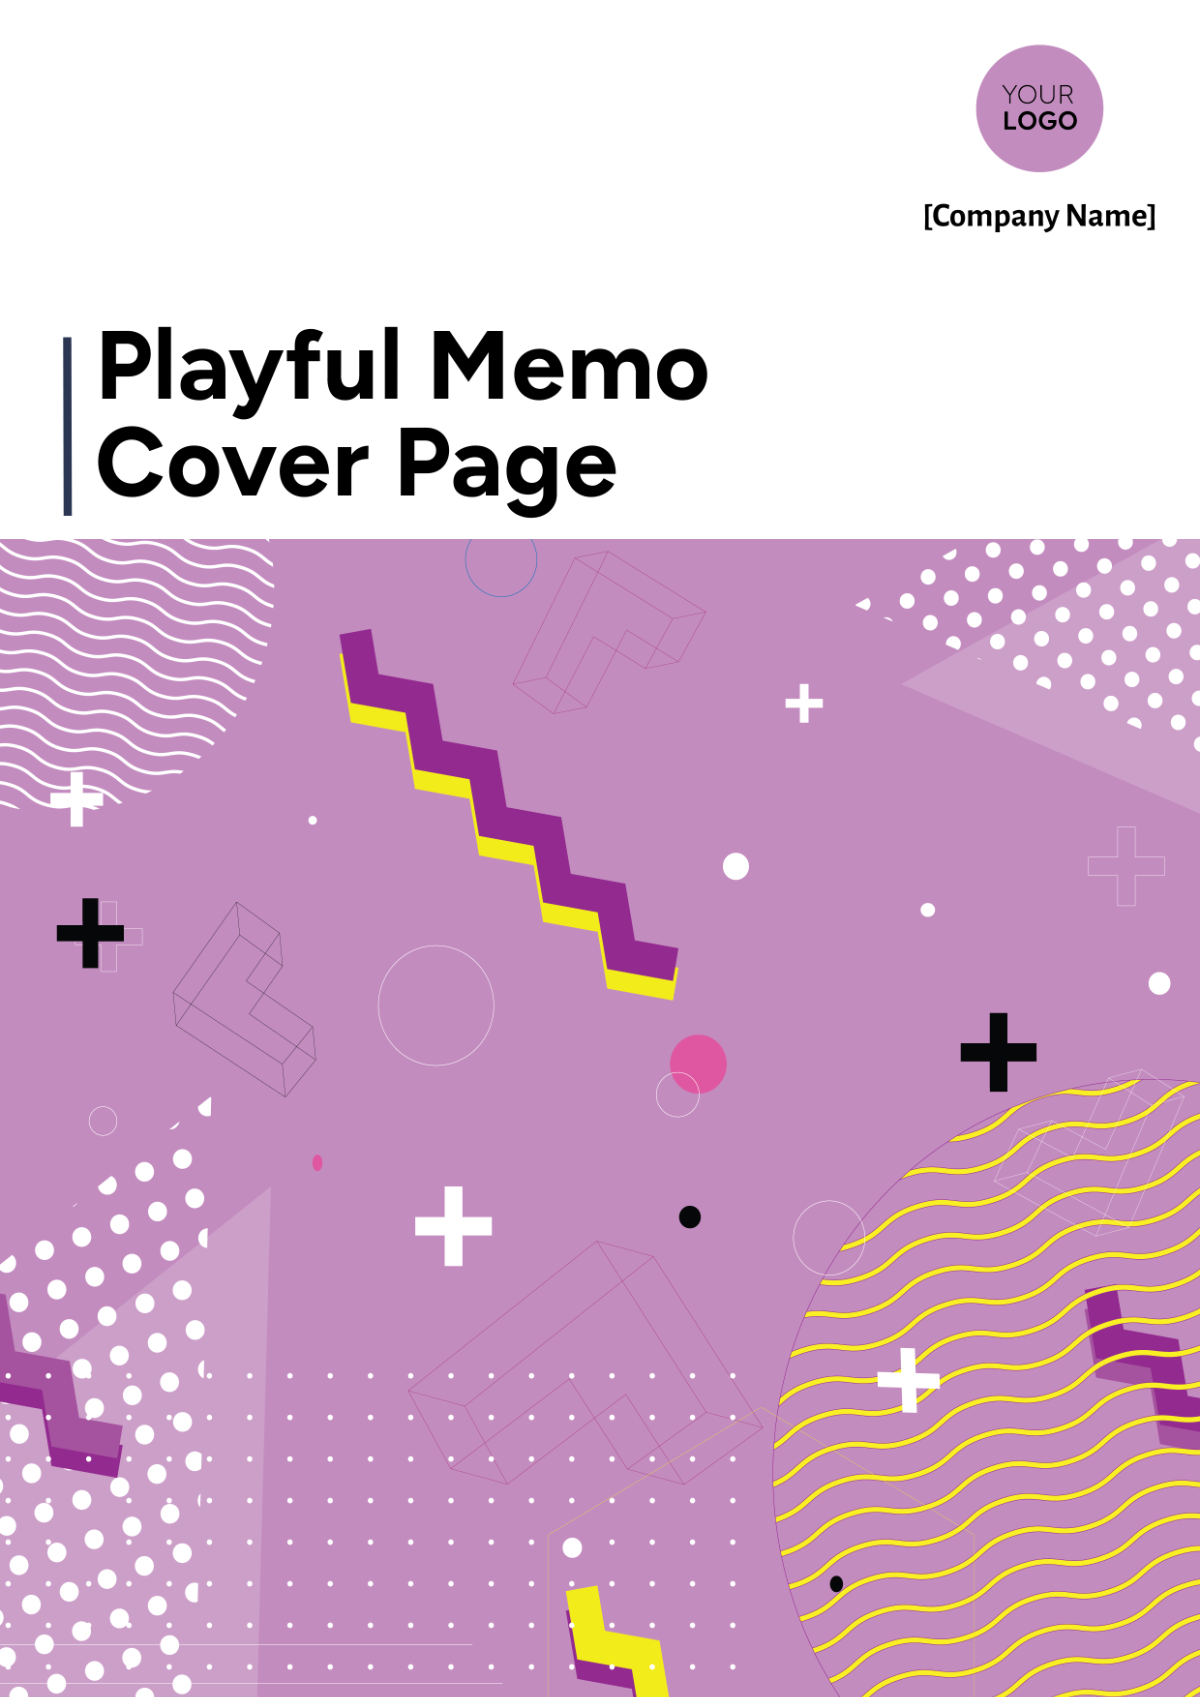 Playful Memo Cover Page Template